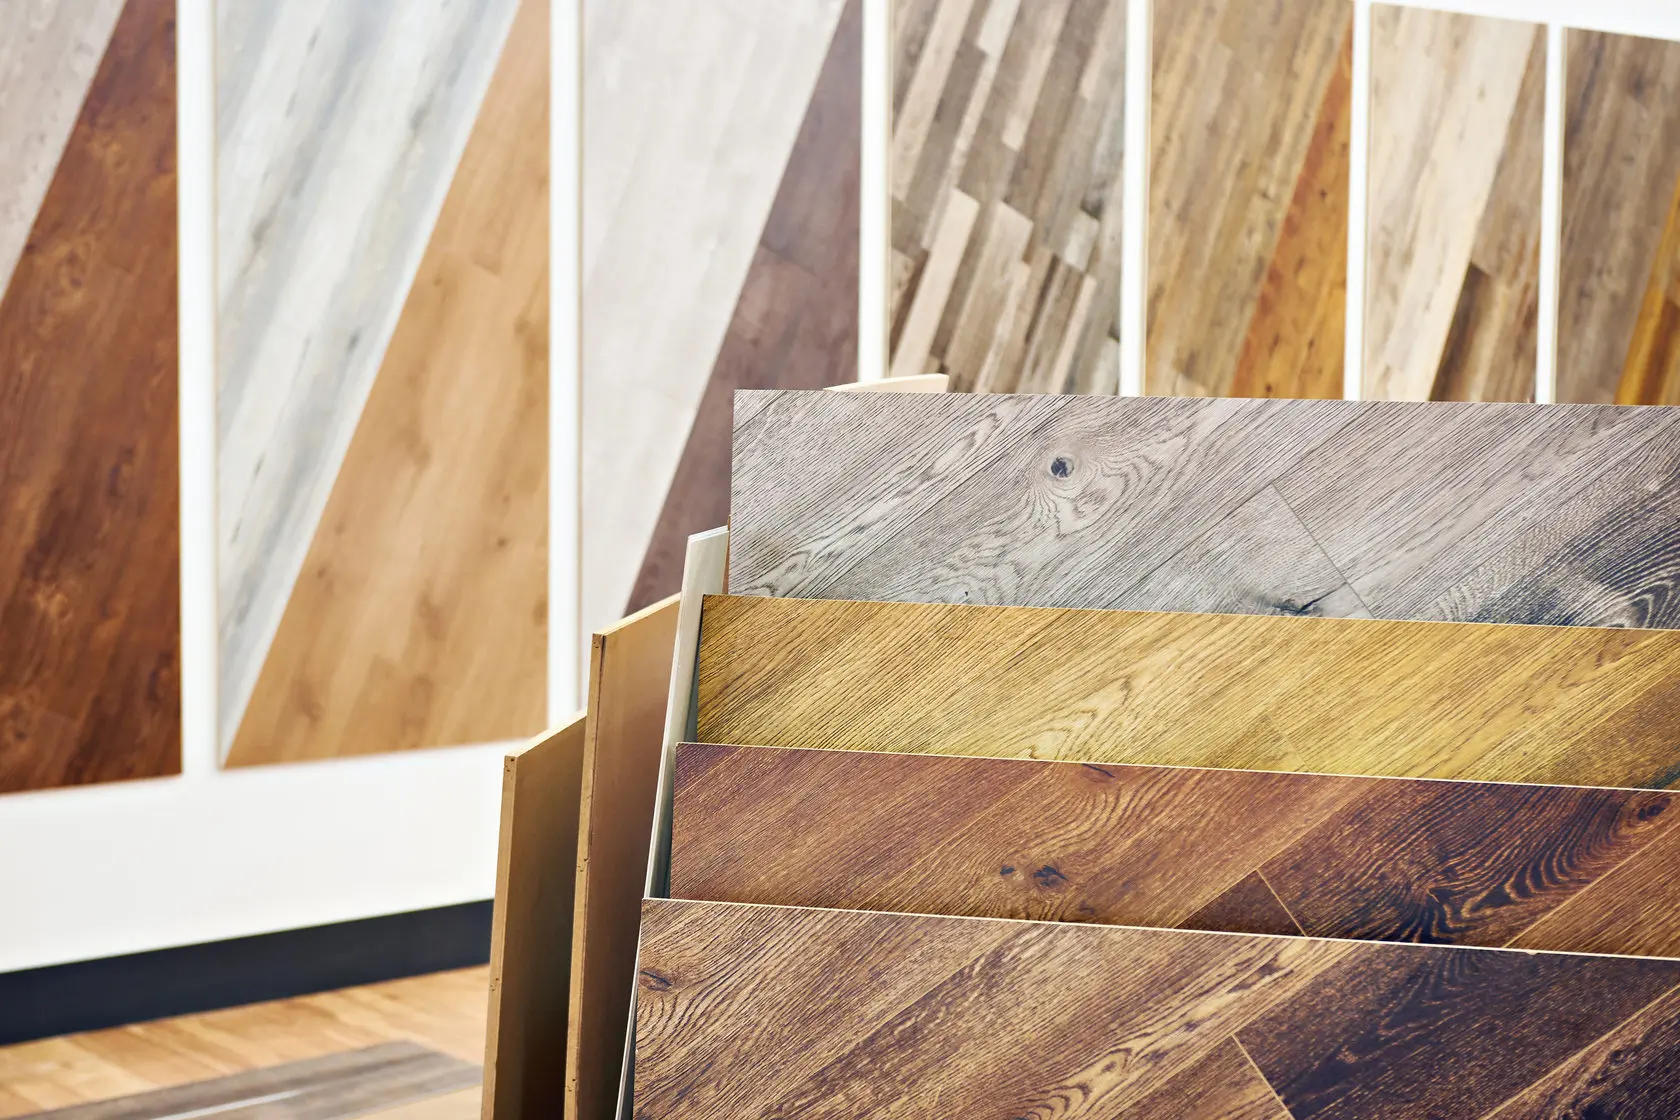 A display of different wooden flooring samples.